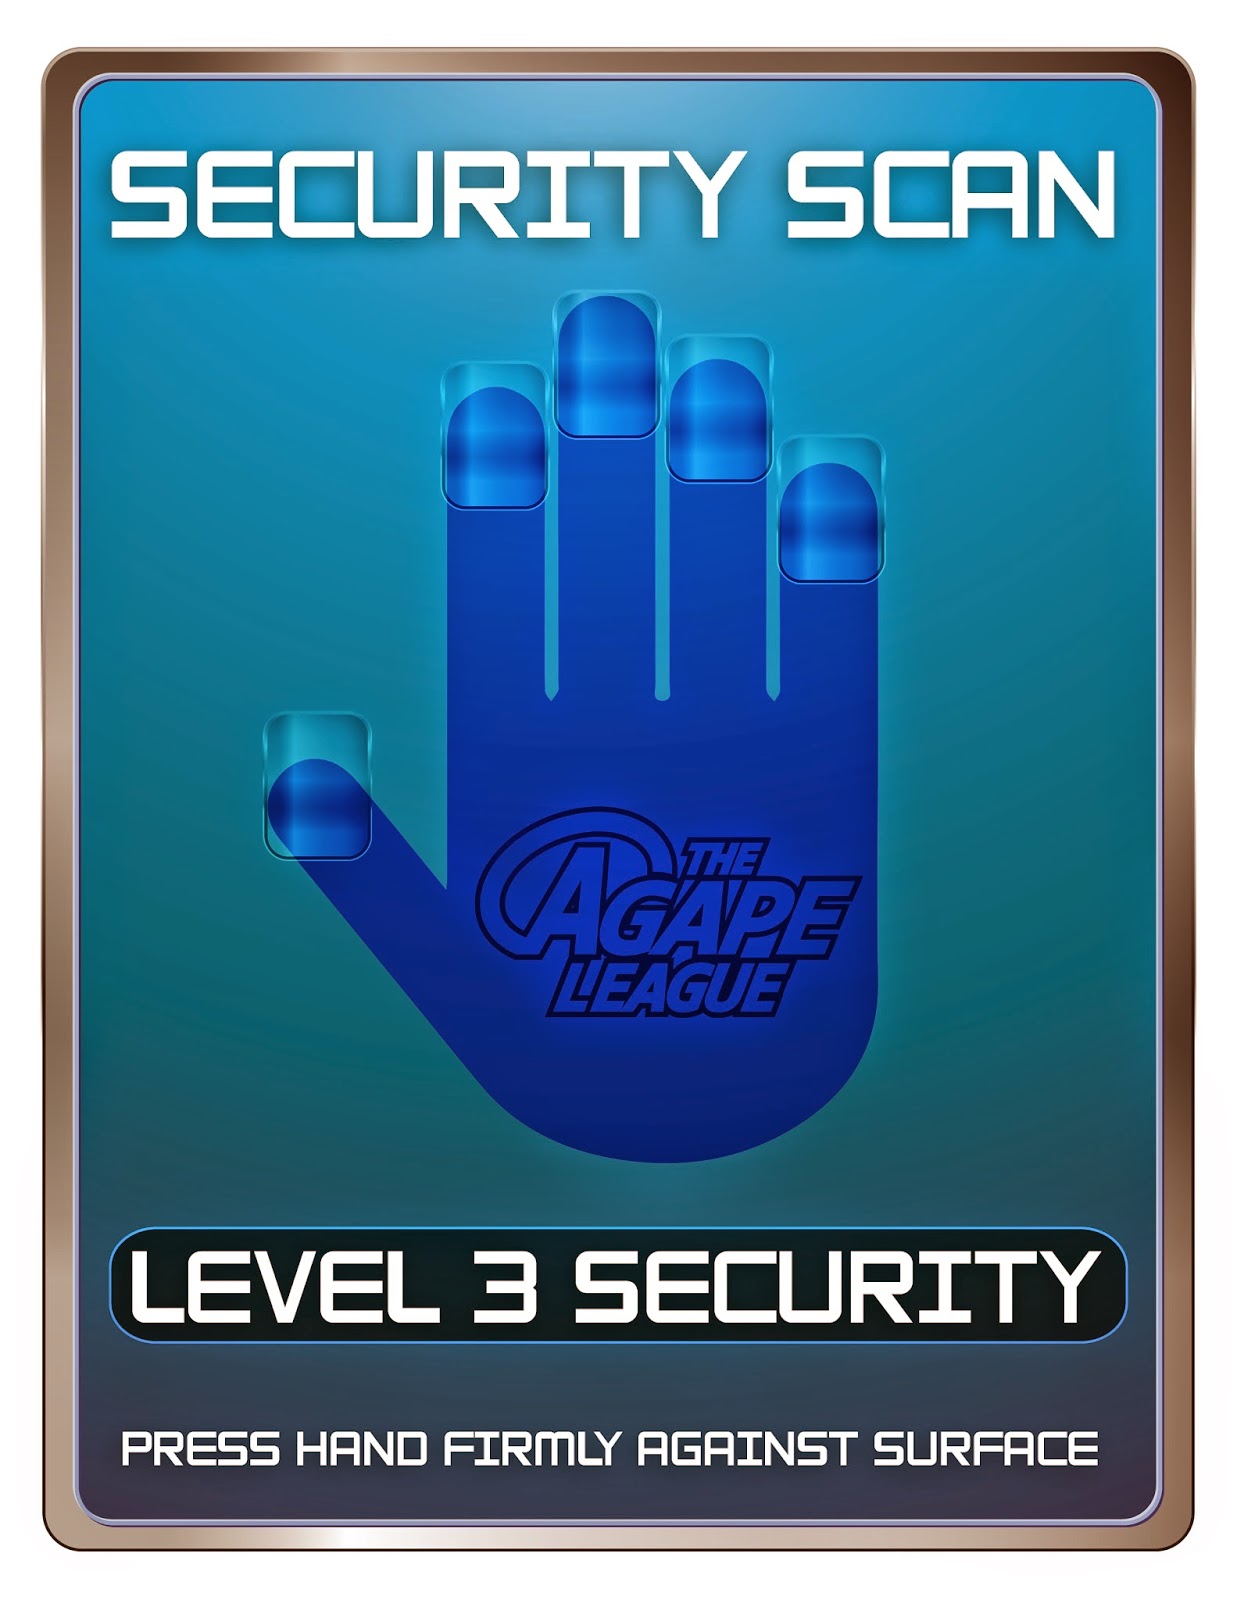 Agape League Security Scanner Prop - Click to download print files